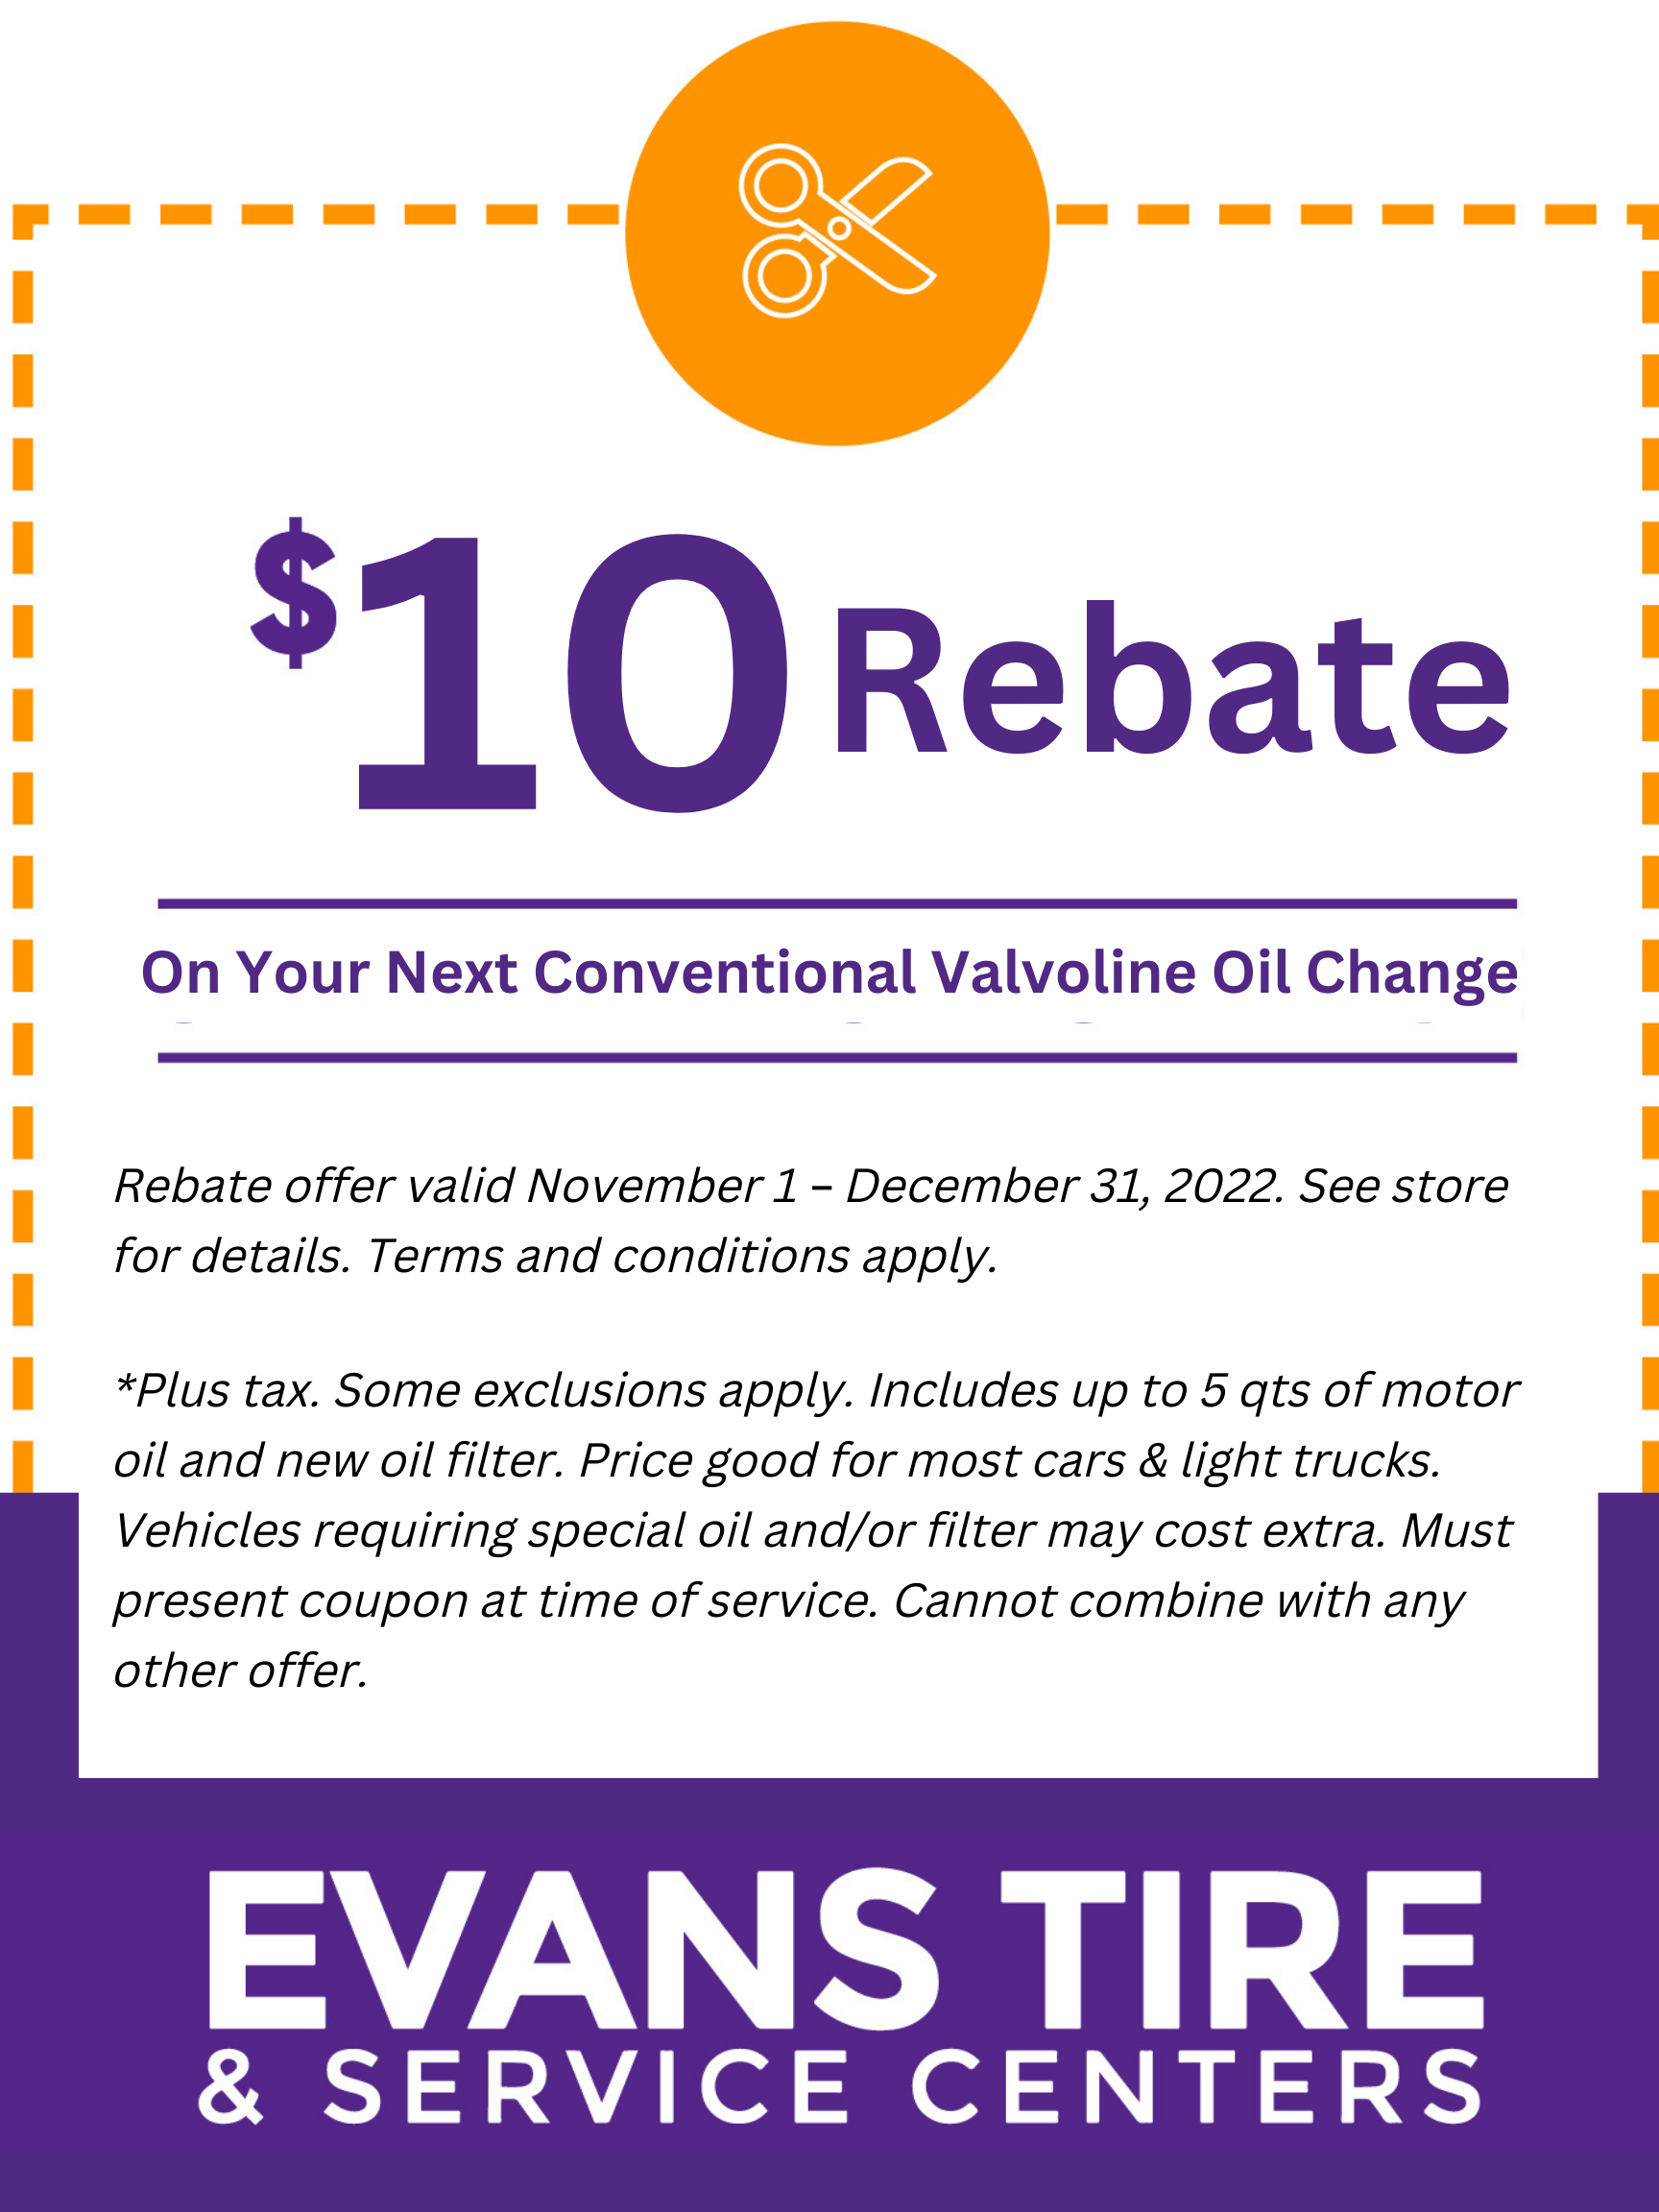 don-t-just-get-an-oil-change-get-the-works-with-the-10-rebate-hurry